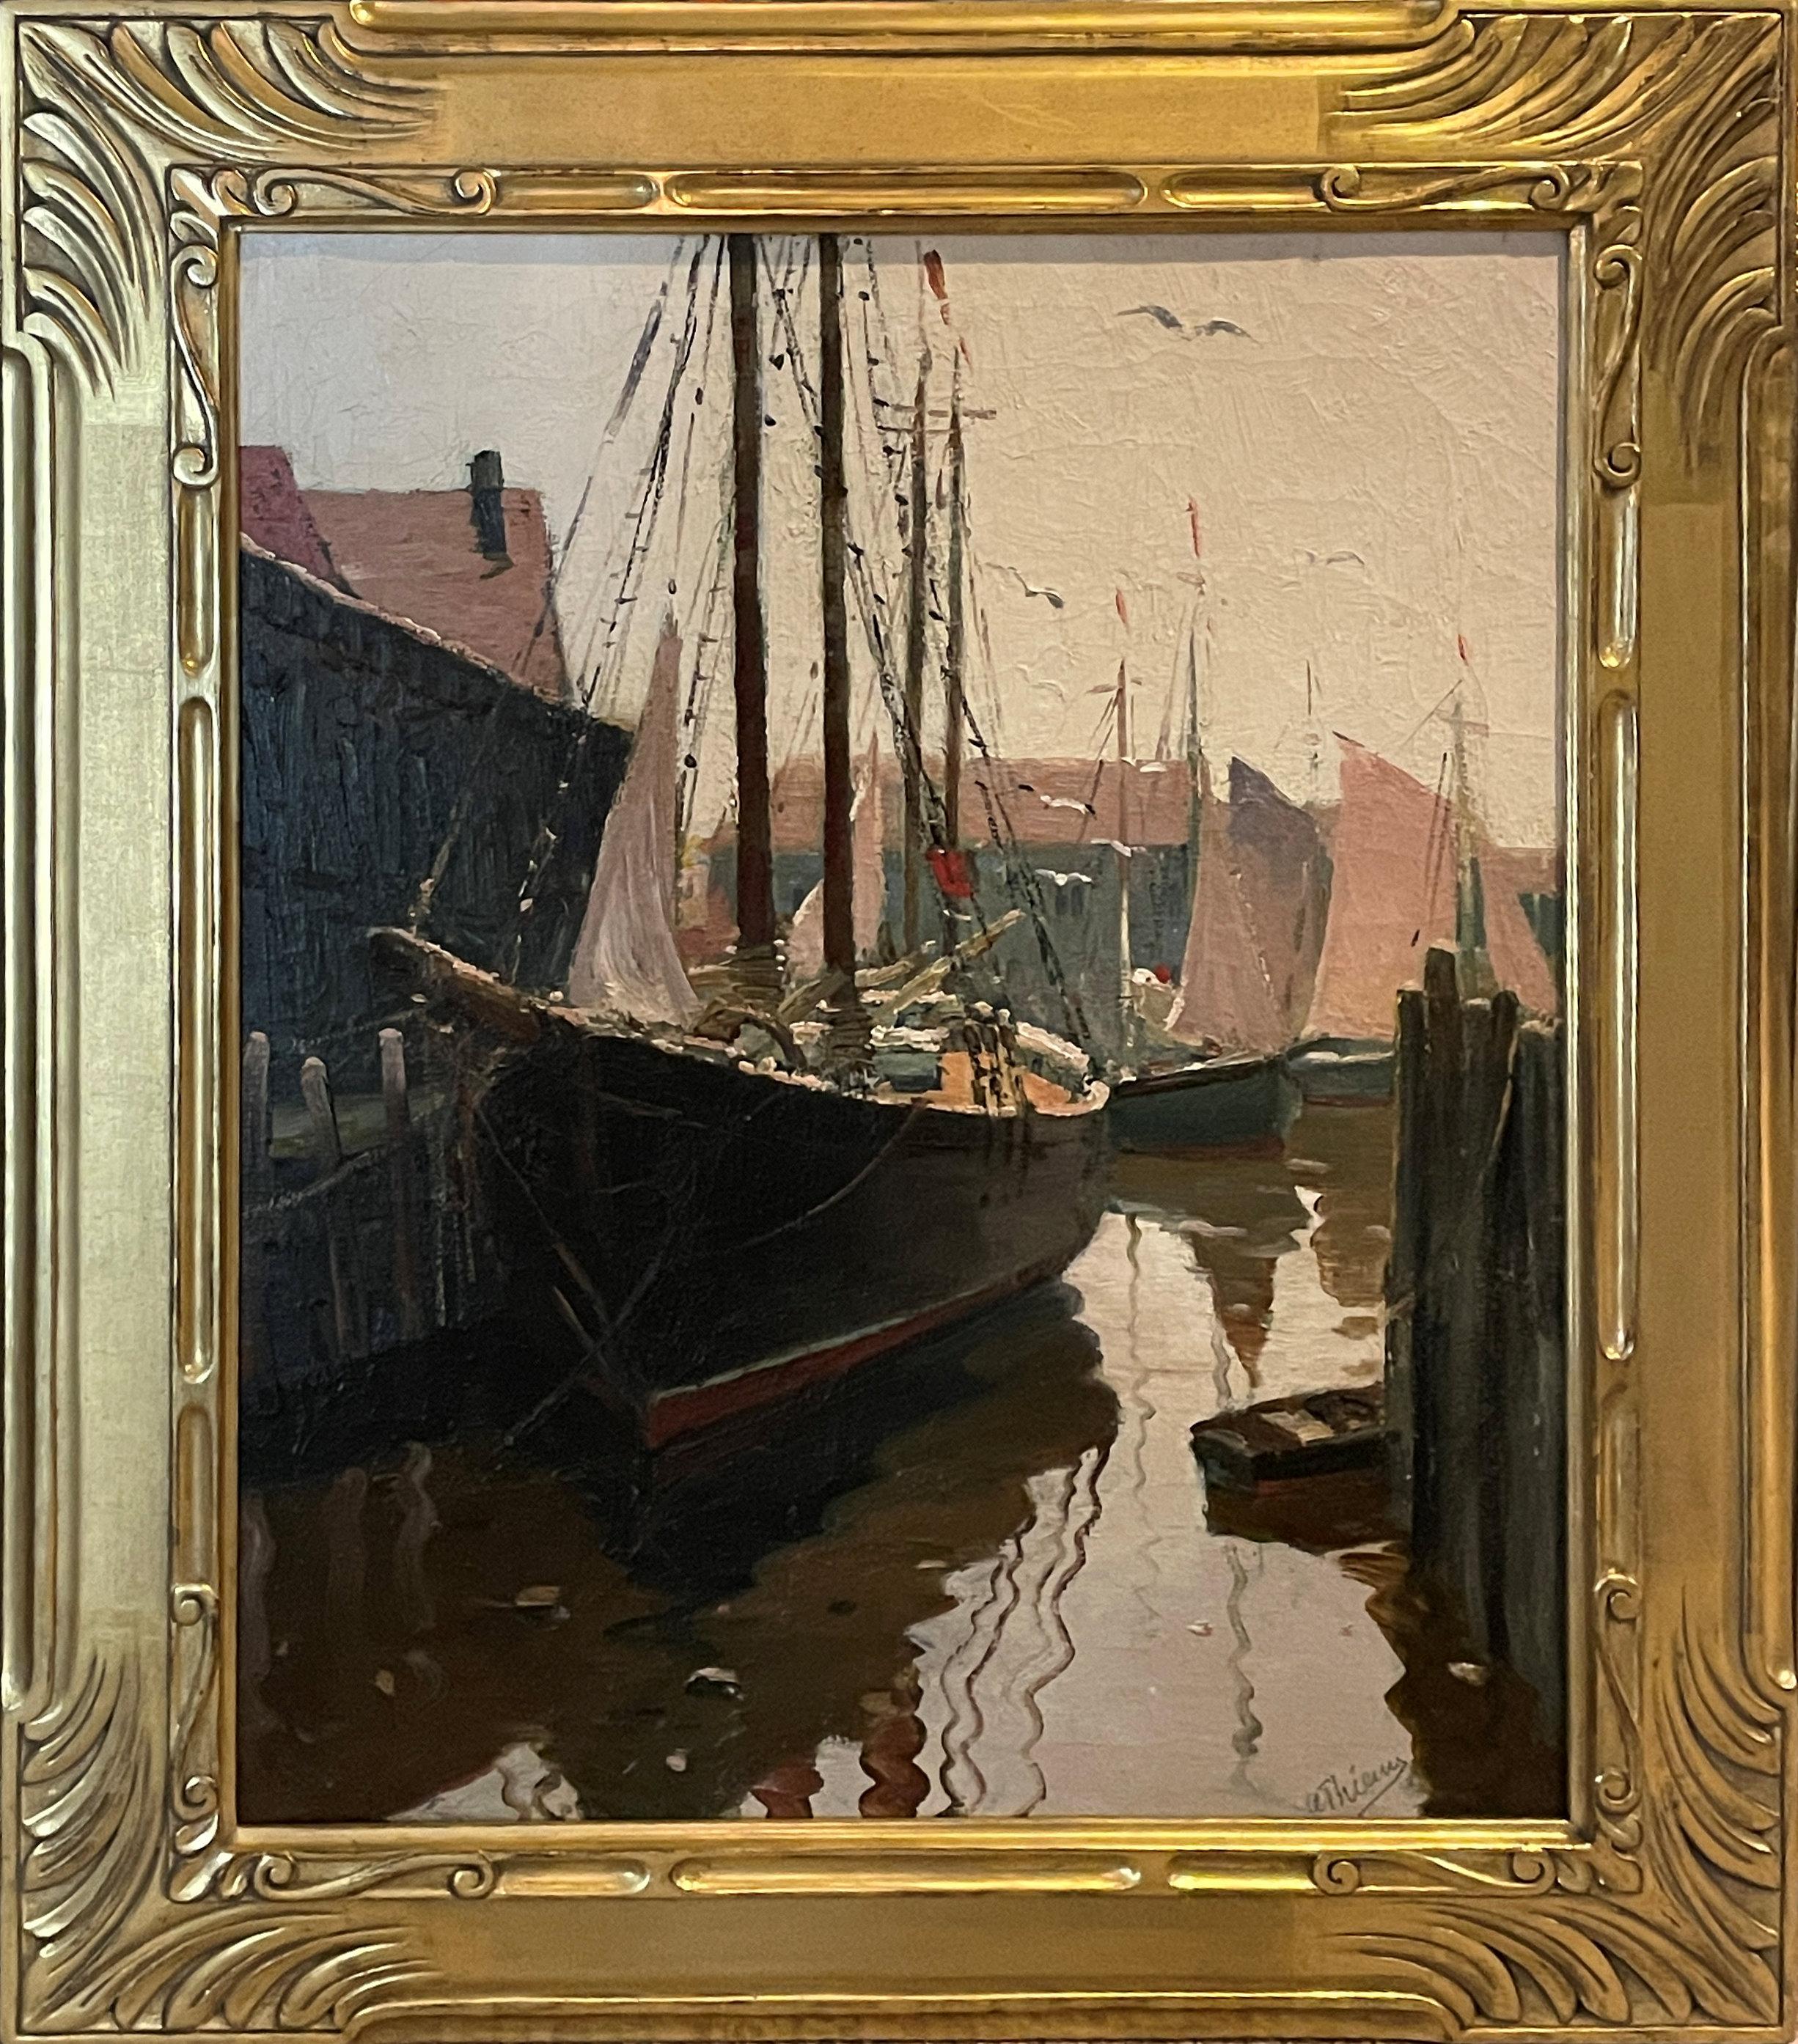 Anthony Thieme
Dismantled Boat
Signed lower right
Oil on canvas
30 x 25 inches

Anthony Thieme was born in the Dutch port city of Rotterdam in 1888. He studied at the Academy of Fine Arts in Rotterdam, at the Royal Academy at the Hague, as an